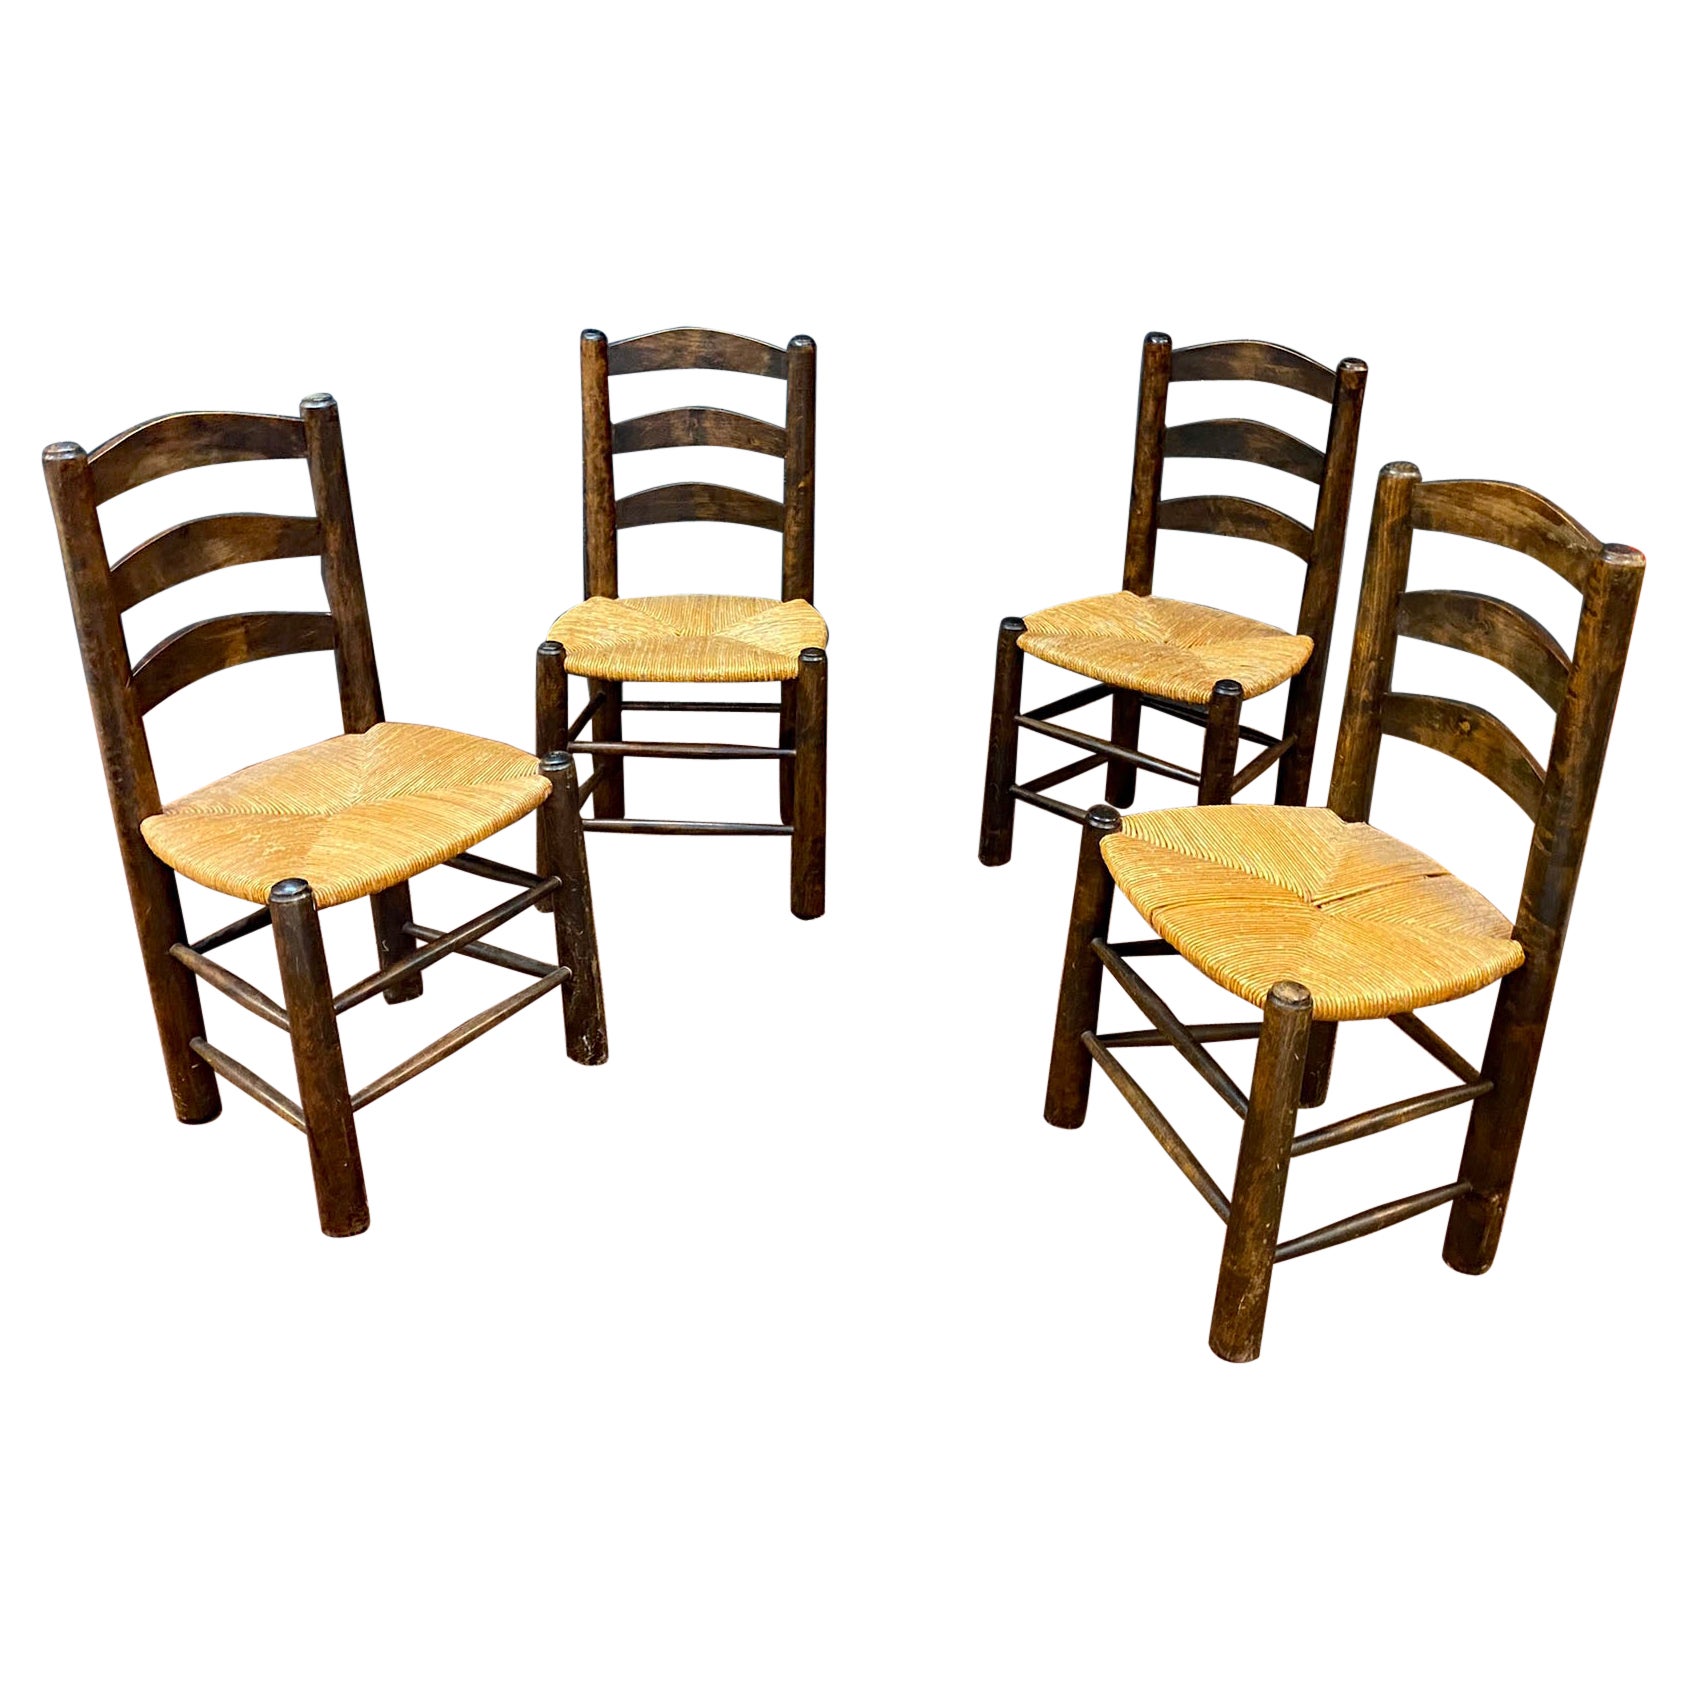 Four Brutalist Pine Chairs, circa 1950 For Sale